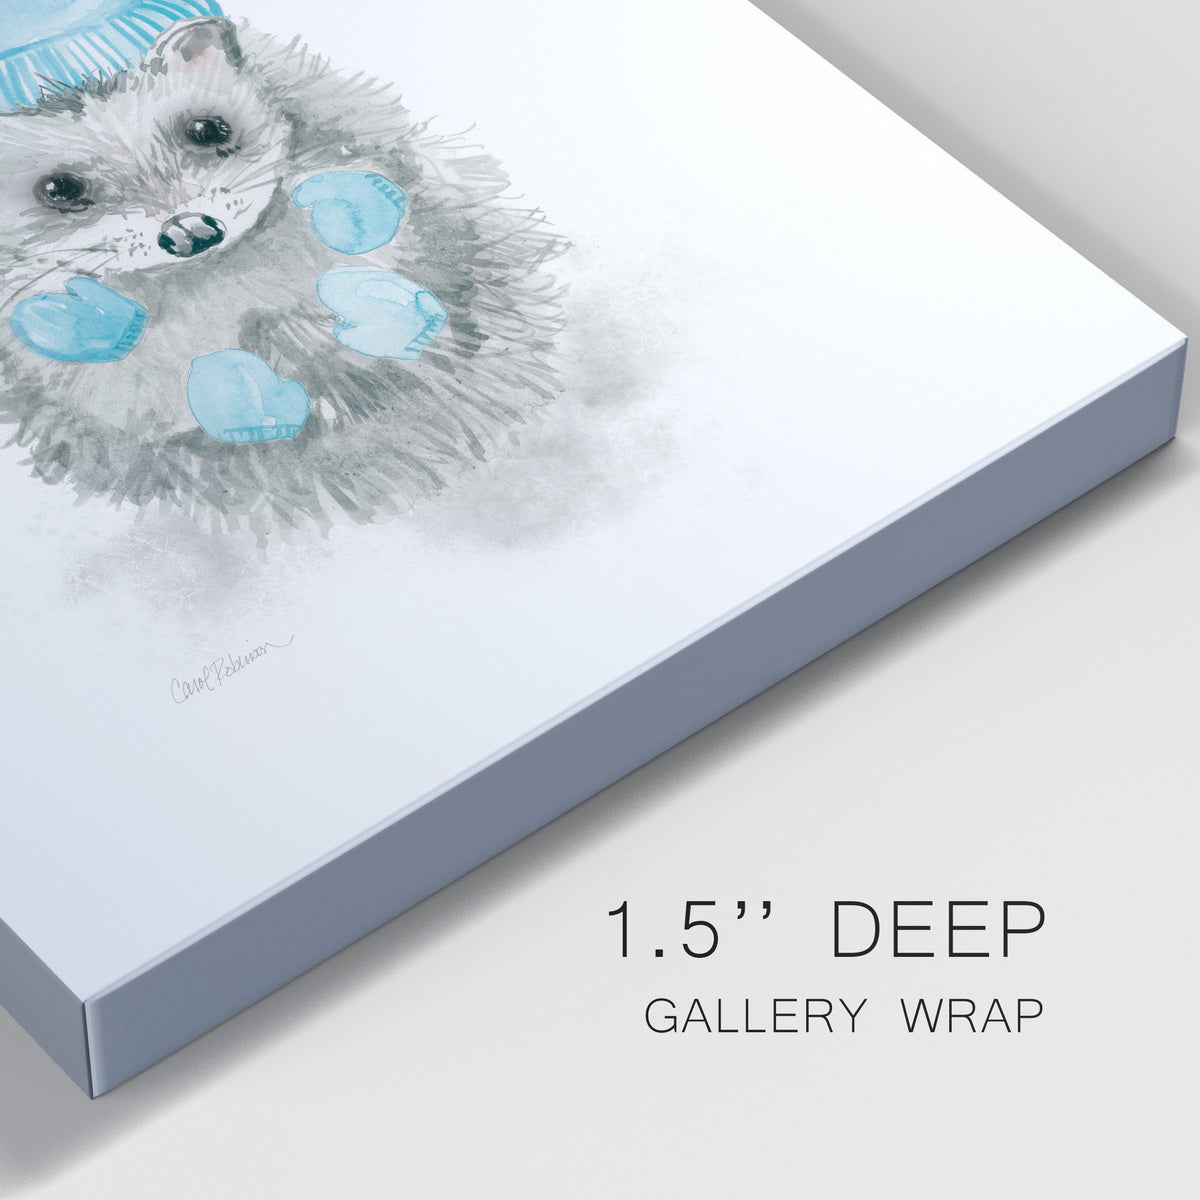 Christmas Critter Hedgehog-Premium Gallery Wrapped Canvas - Ready to Hang